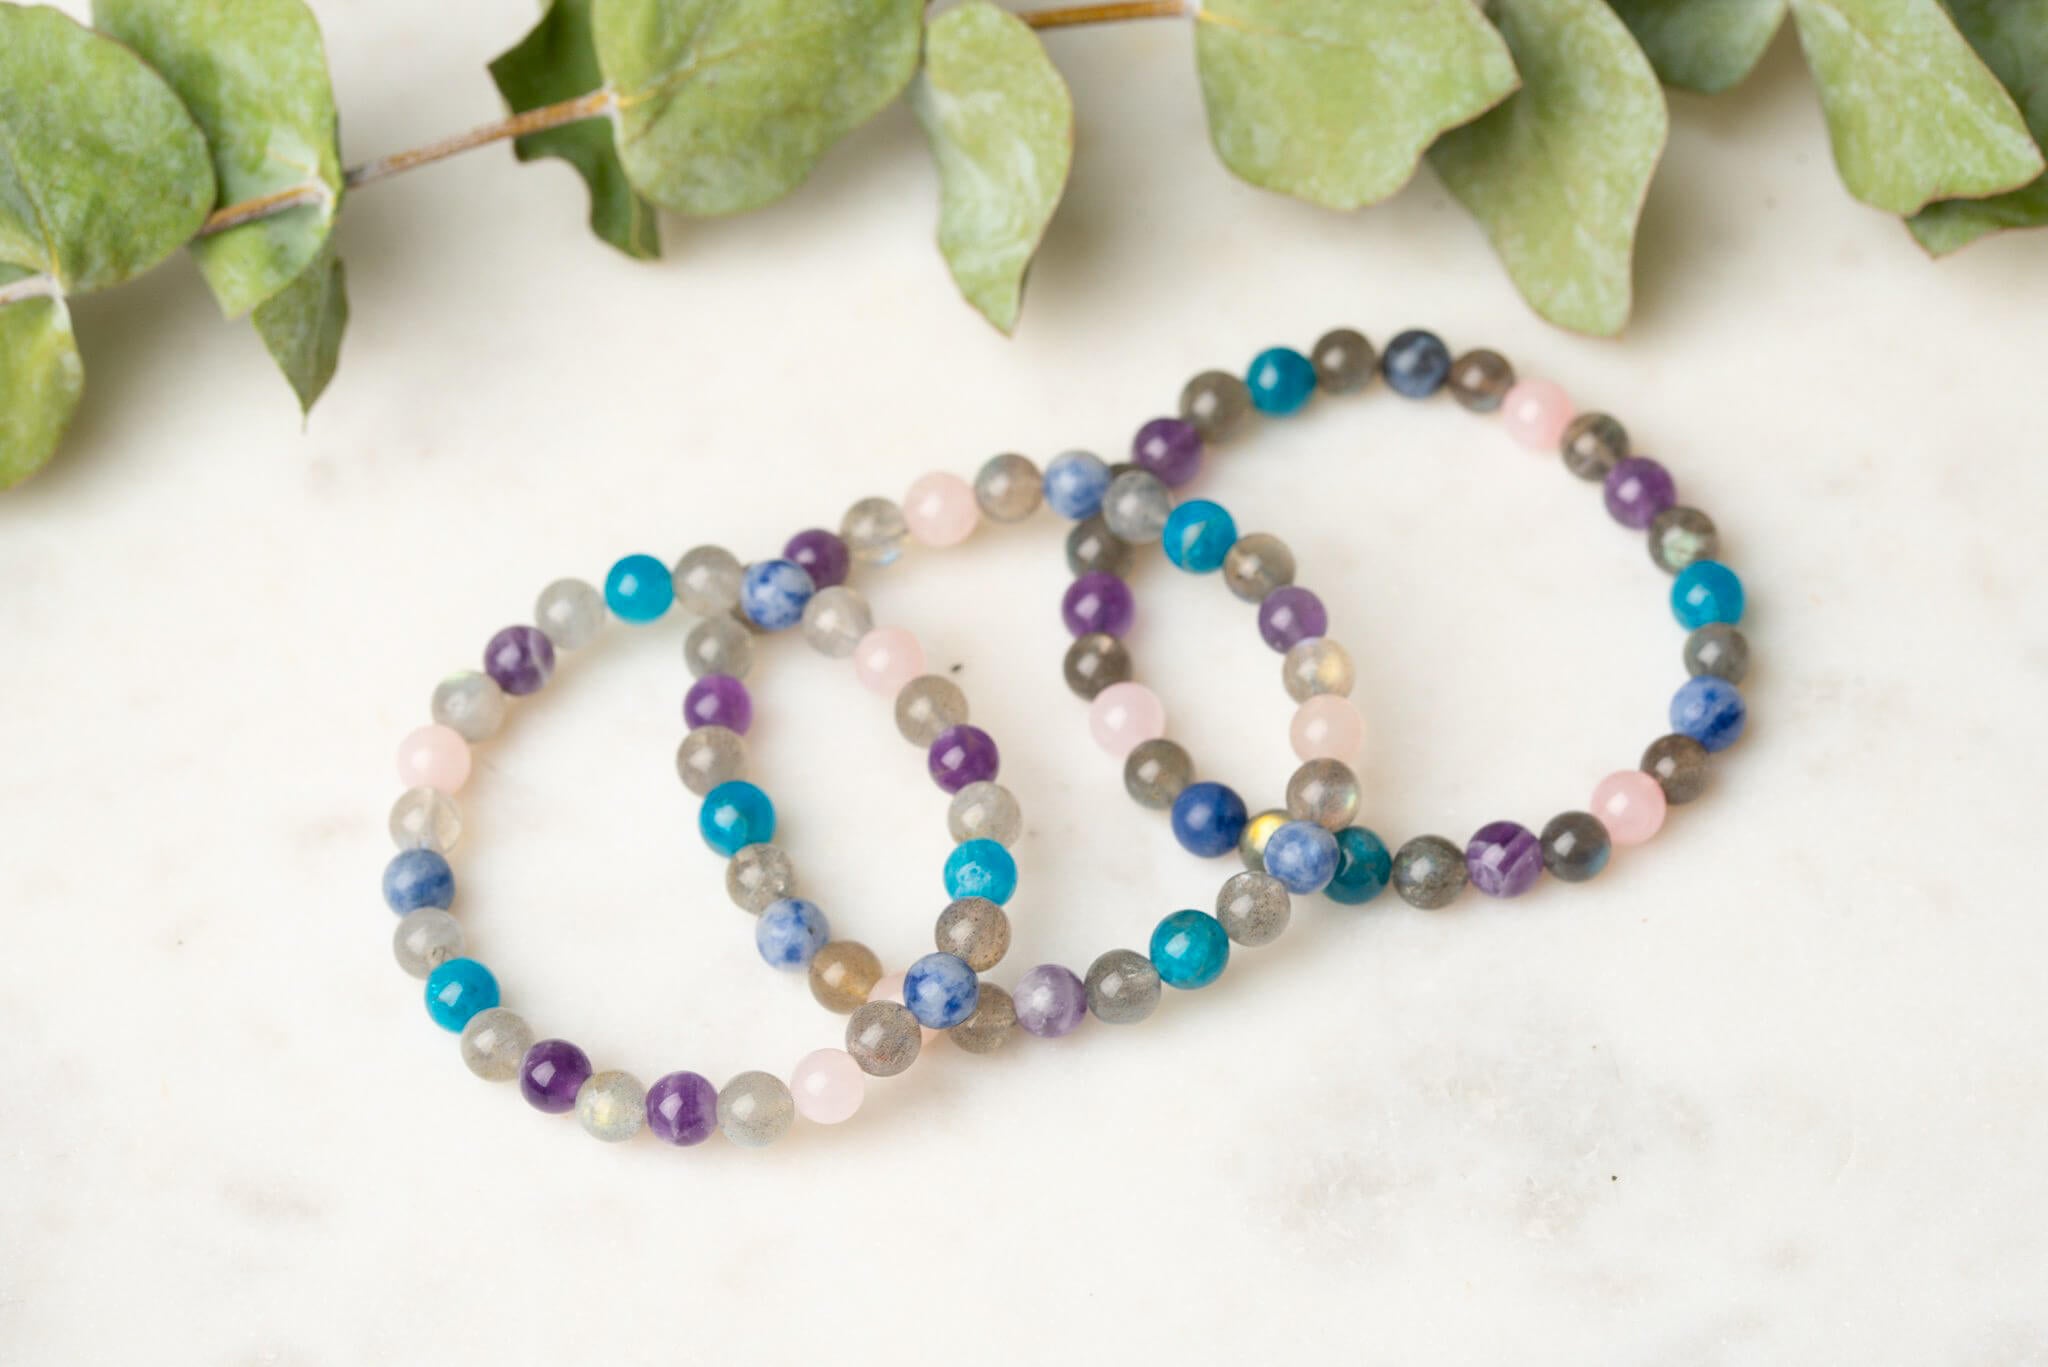 Manifest Your Desires with Crystal Intention Beads Bracelets | Meaningful  Jewelry